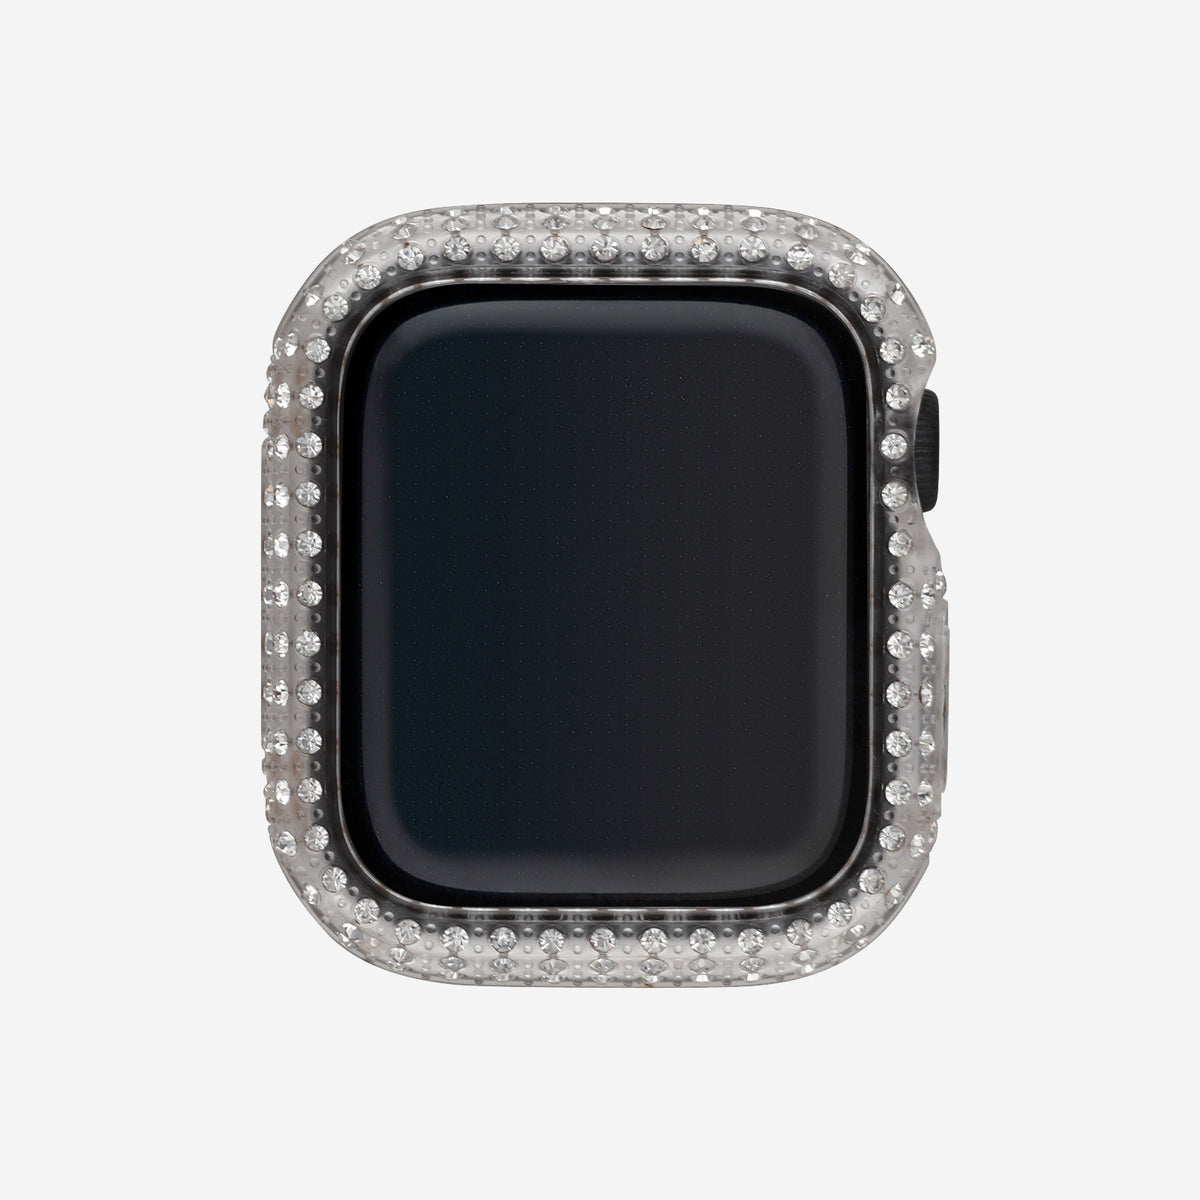 Apple Watch Crystal Screen Protector Case - Transparent